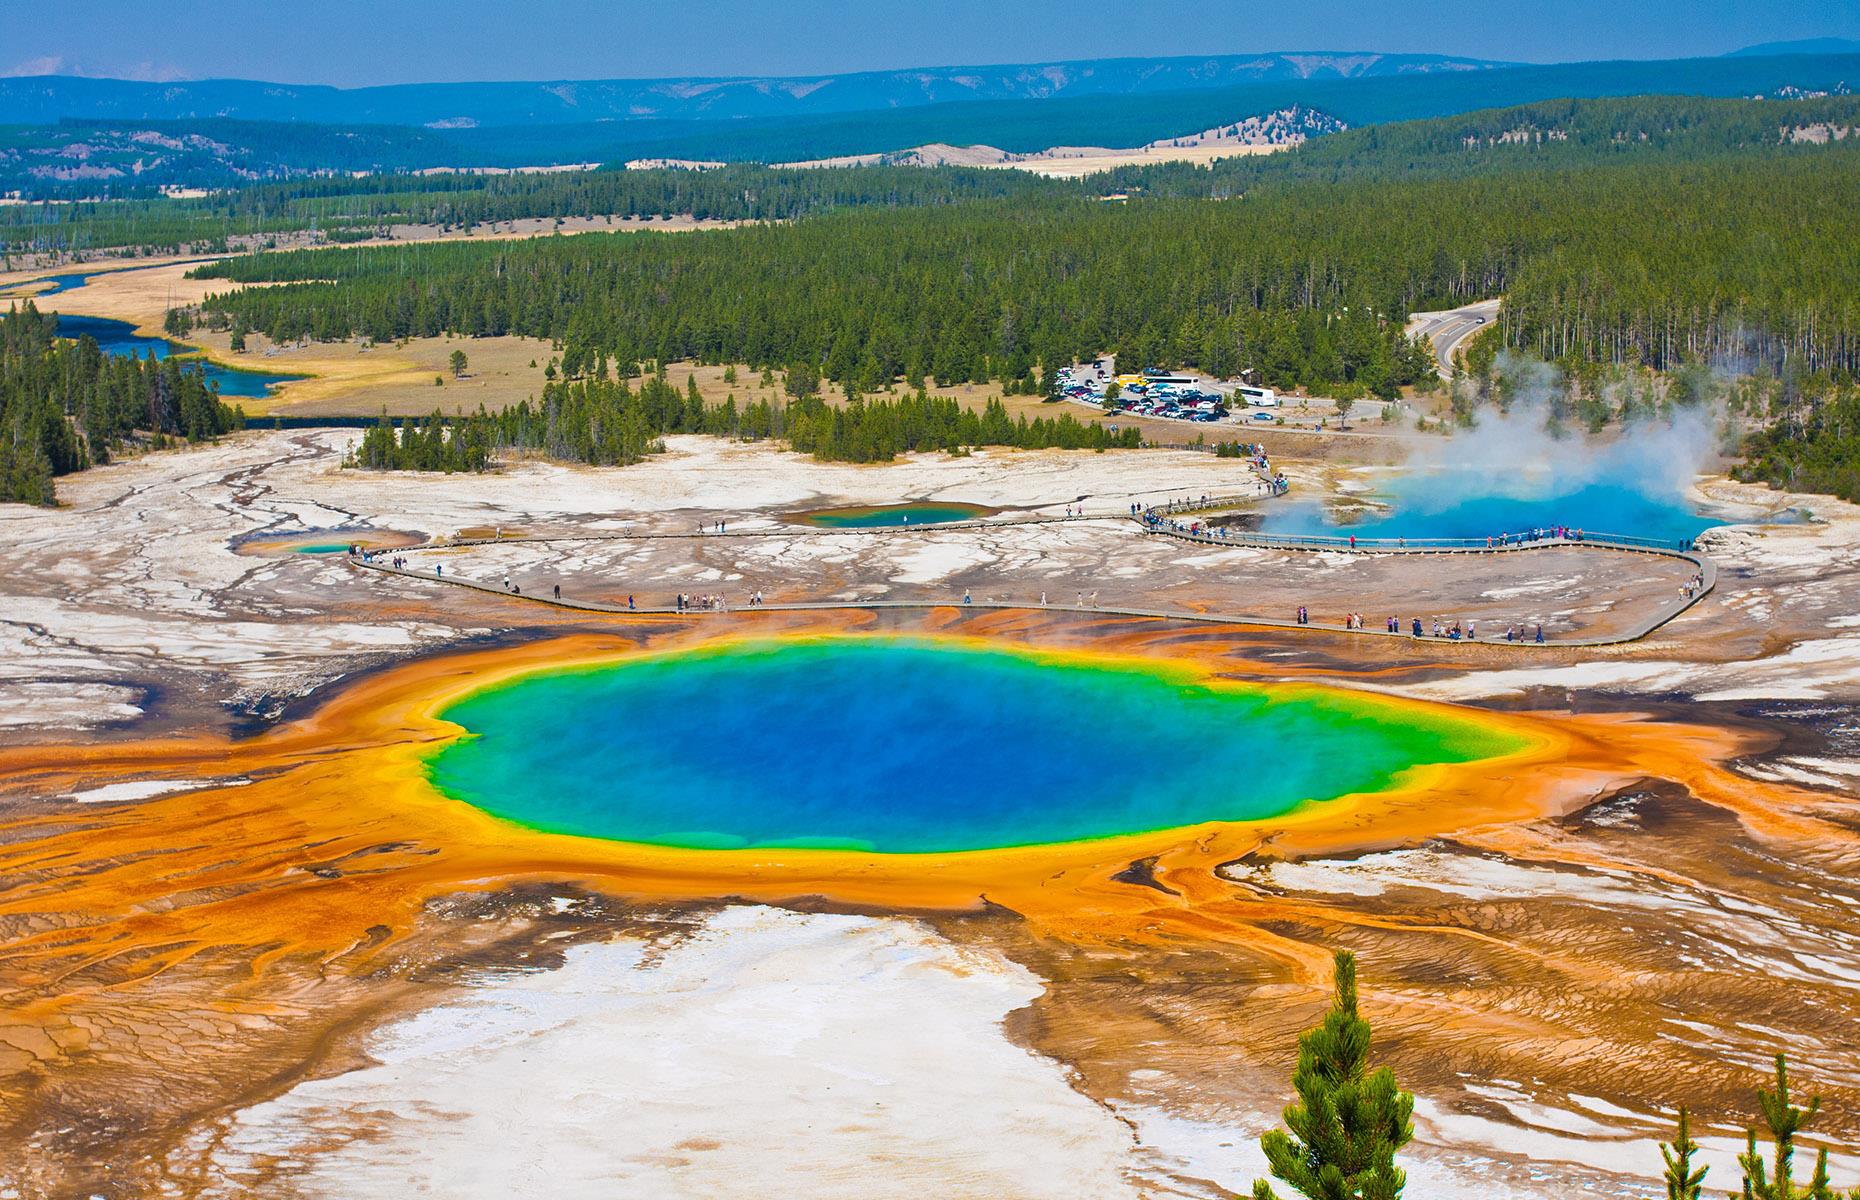 <p>It's a big year for Yellowstone: the beloved national park marks its 150th birthday this year. It's celebrating with a slew of events and openings, including the Yellowstone Tribal Heritage Center, a hub for Indigenous artists and educators that will welcome visitors from May 2022. There'll also be a display of historic park vehicles and a range of park-wide improvement projects.</p>  <p><a href="https://www.loveexploring.com/guides/76749/northern-wyoming-road-trip-the-top-things-to-do-where-to-stay-what-to-eat"><strong>Discover Yellowstone on a northern Wyoming road trip</strong></a></p>